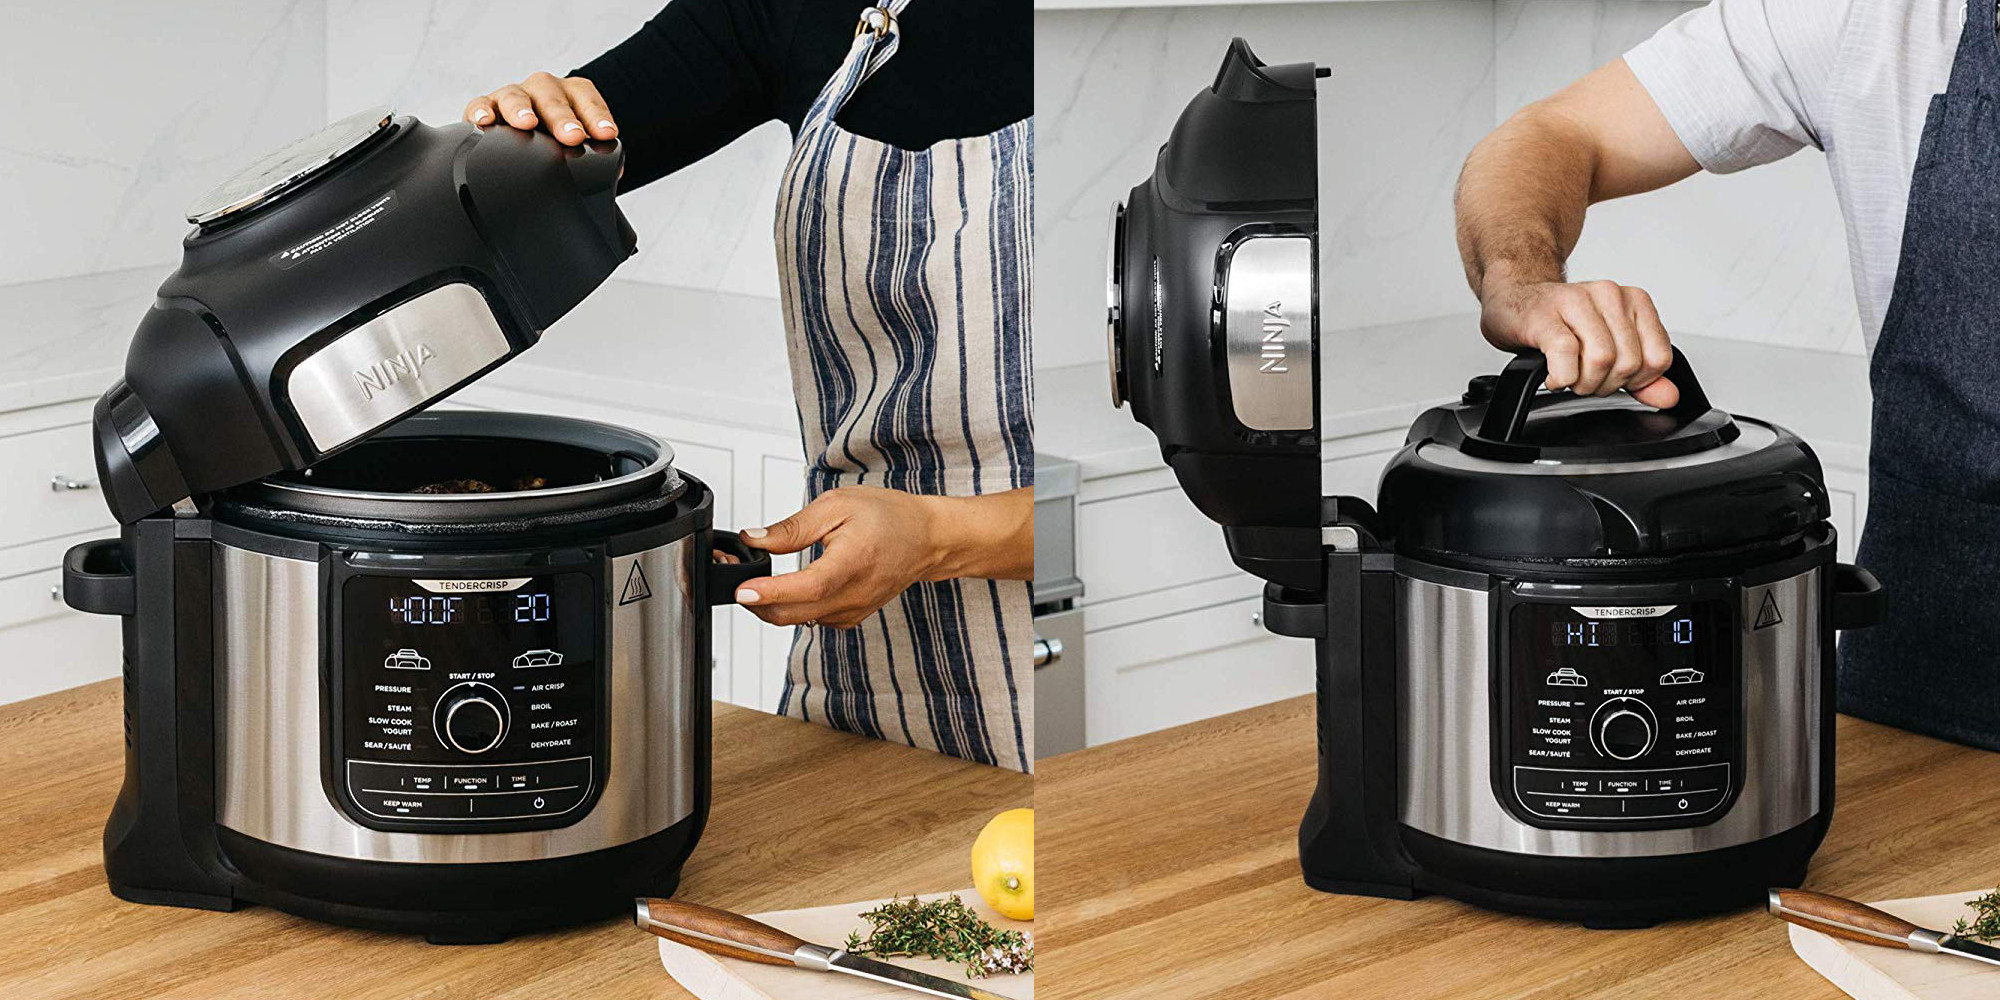 Feed the whole family and then some: Ninja's 8-Qt. Cooker at $200 (Reg.  $280+)